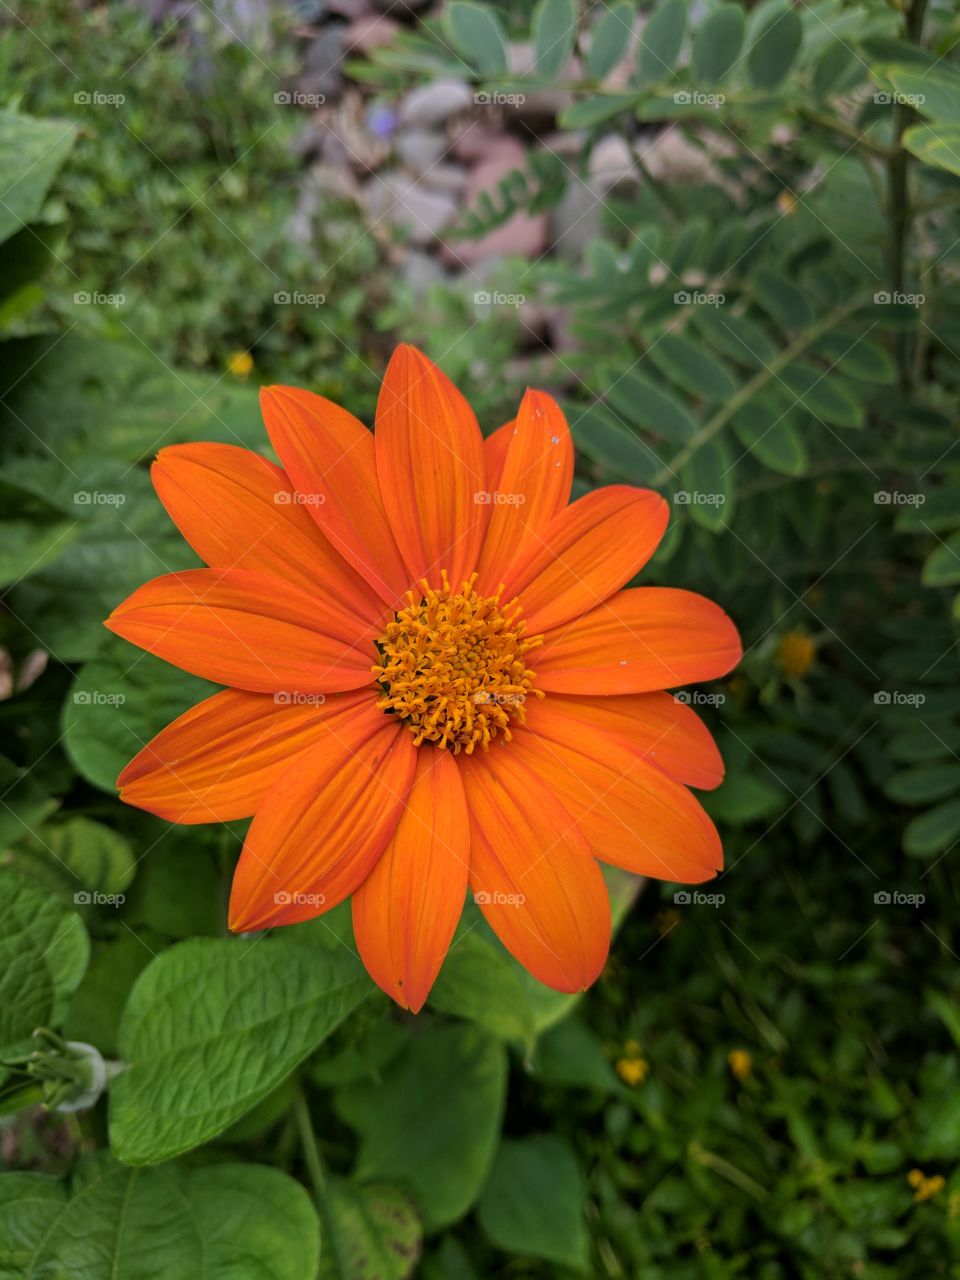 lovely close up of a Mexican sunflower